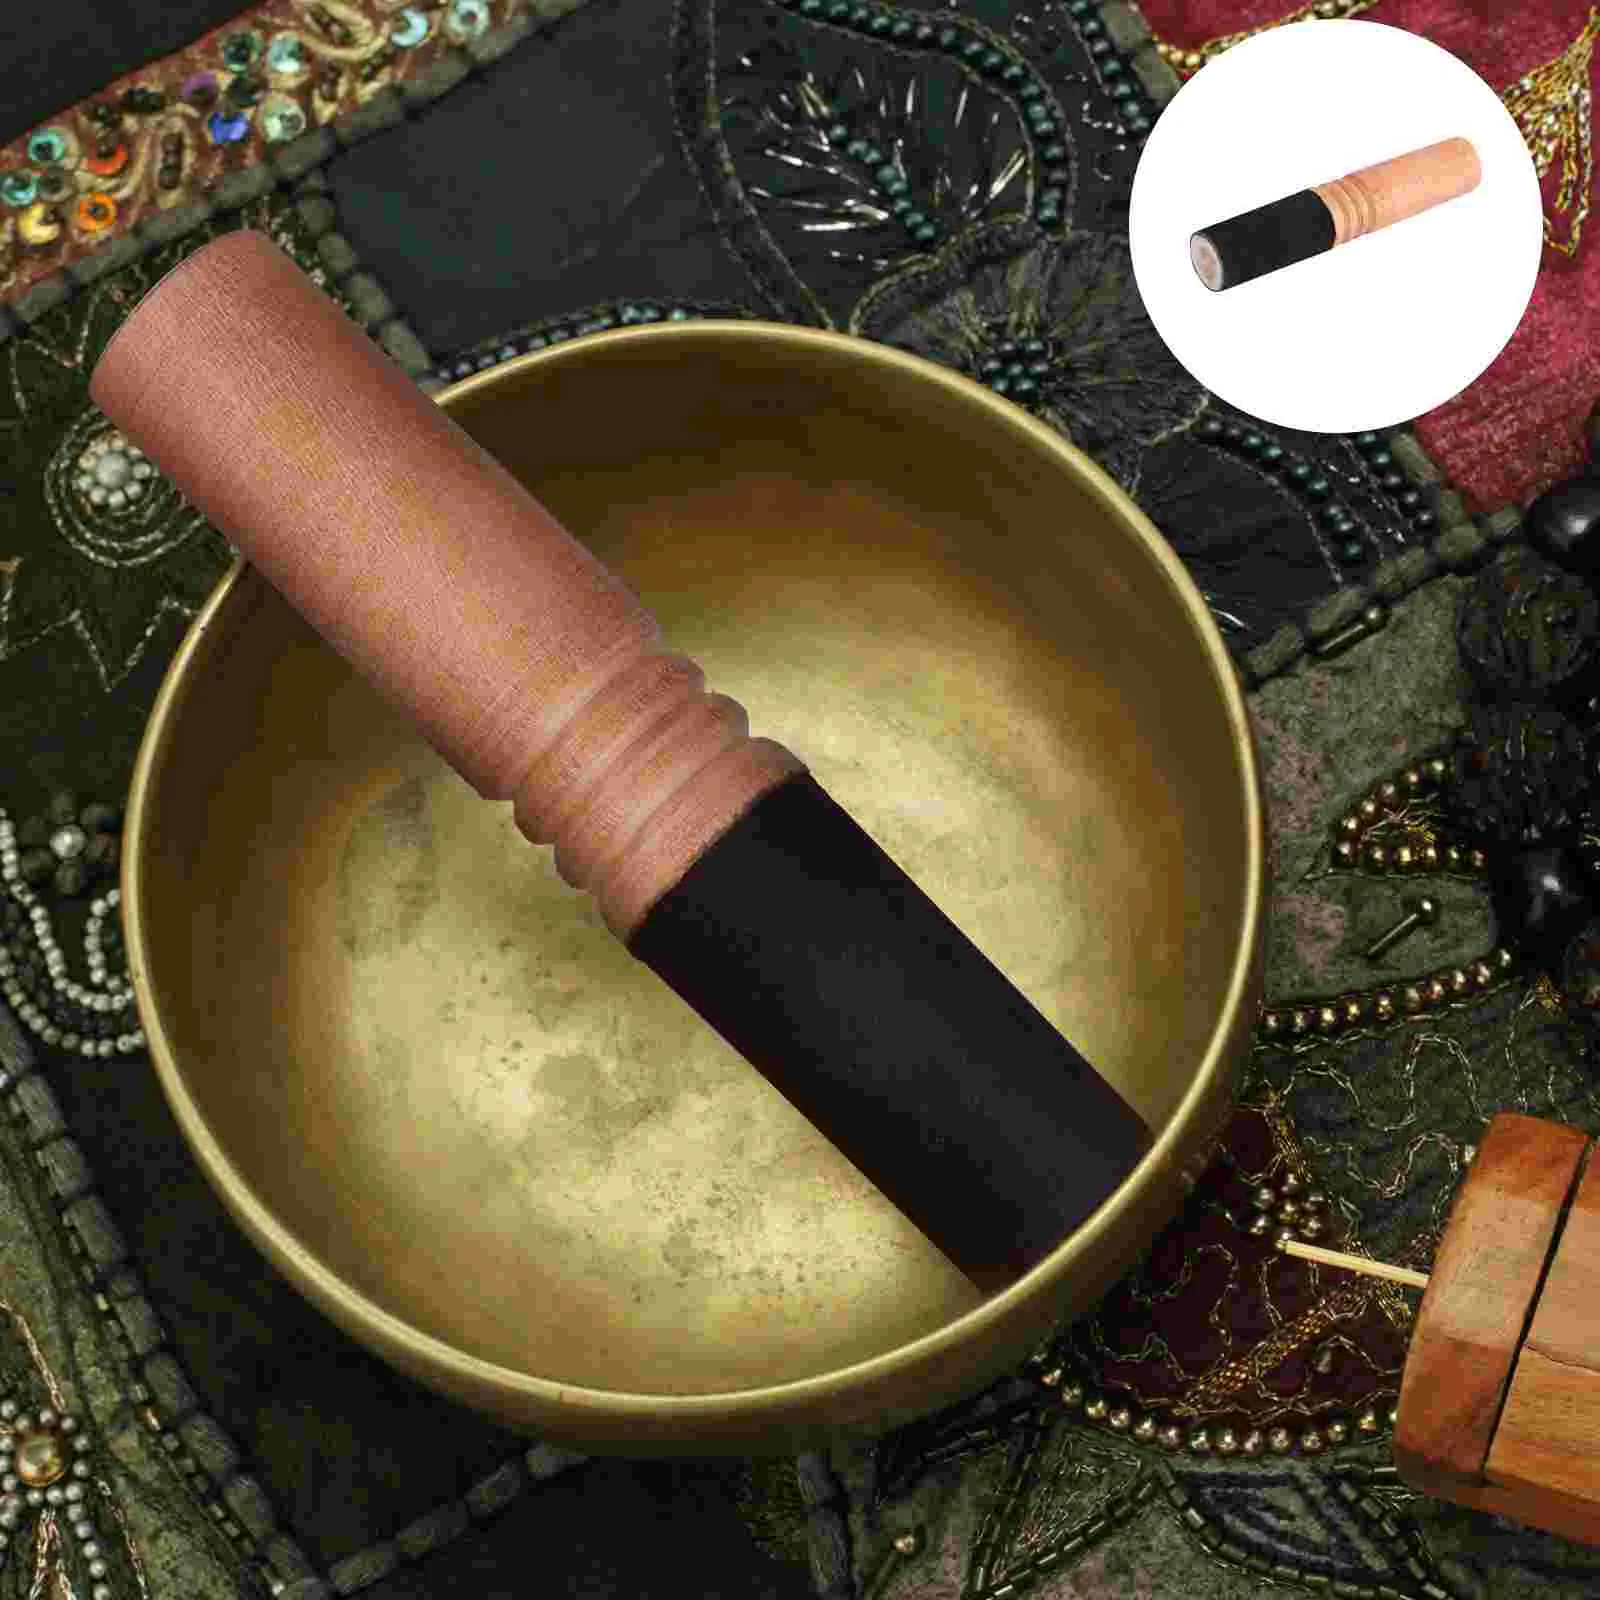 

Singing Bowl Stick Buddha Sound Accessory Hand-made Mallet Metal Stickers Manual Knocking Rods Wooden Handmade Tibetan gong